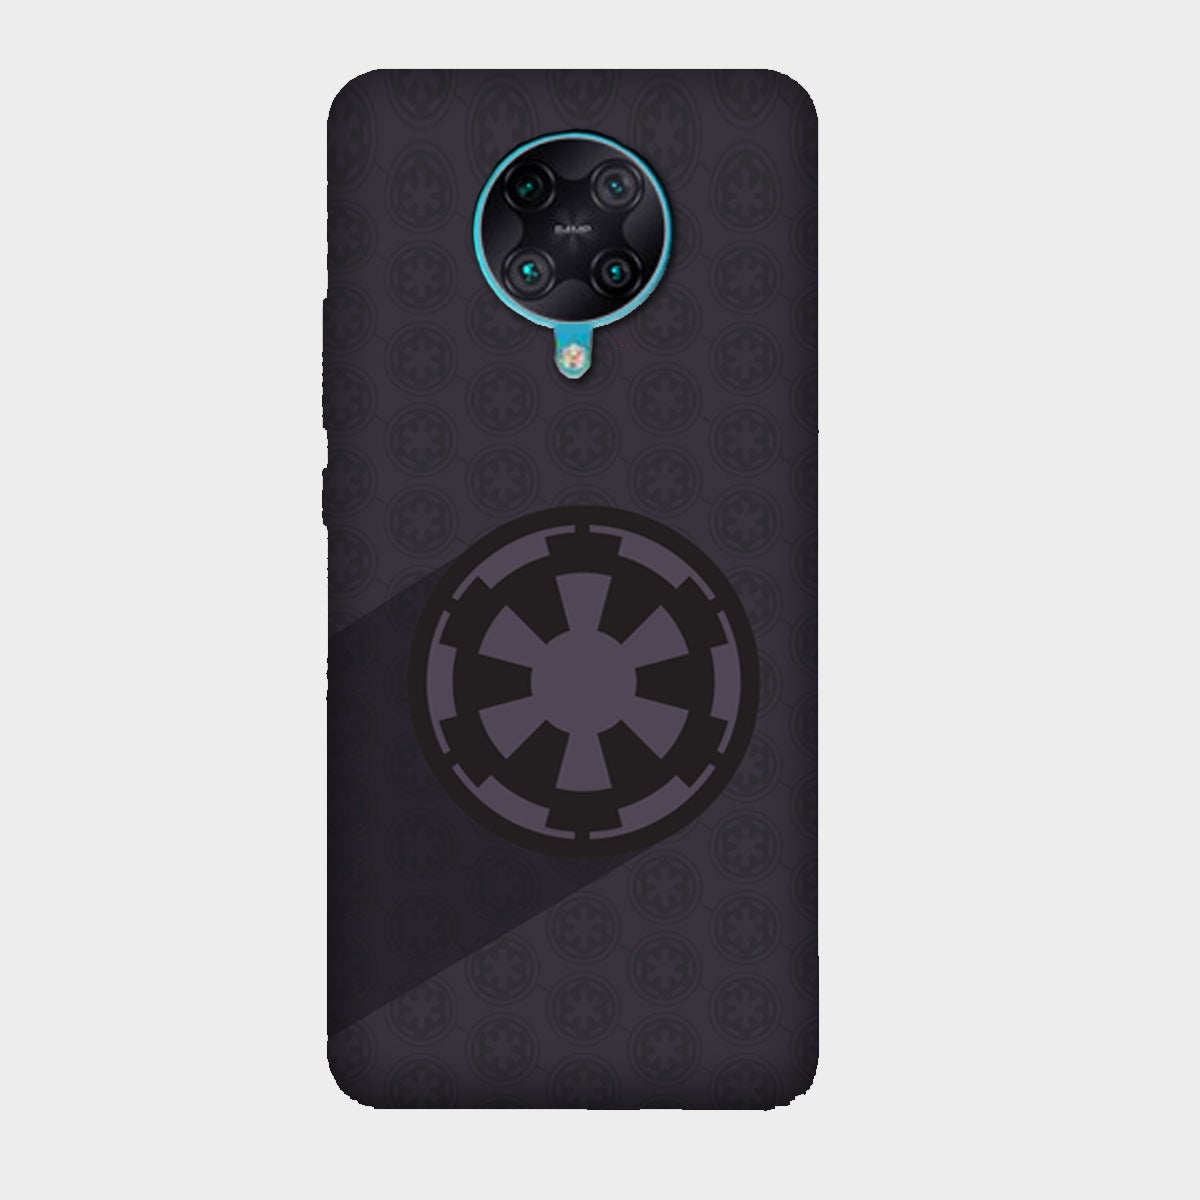 Star Wars - Mobile Phone Cover - Hard Case